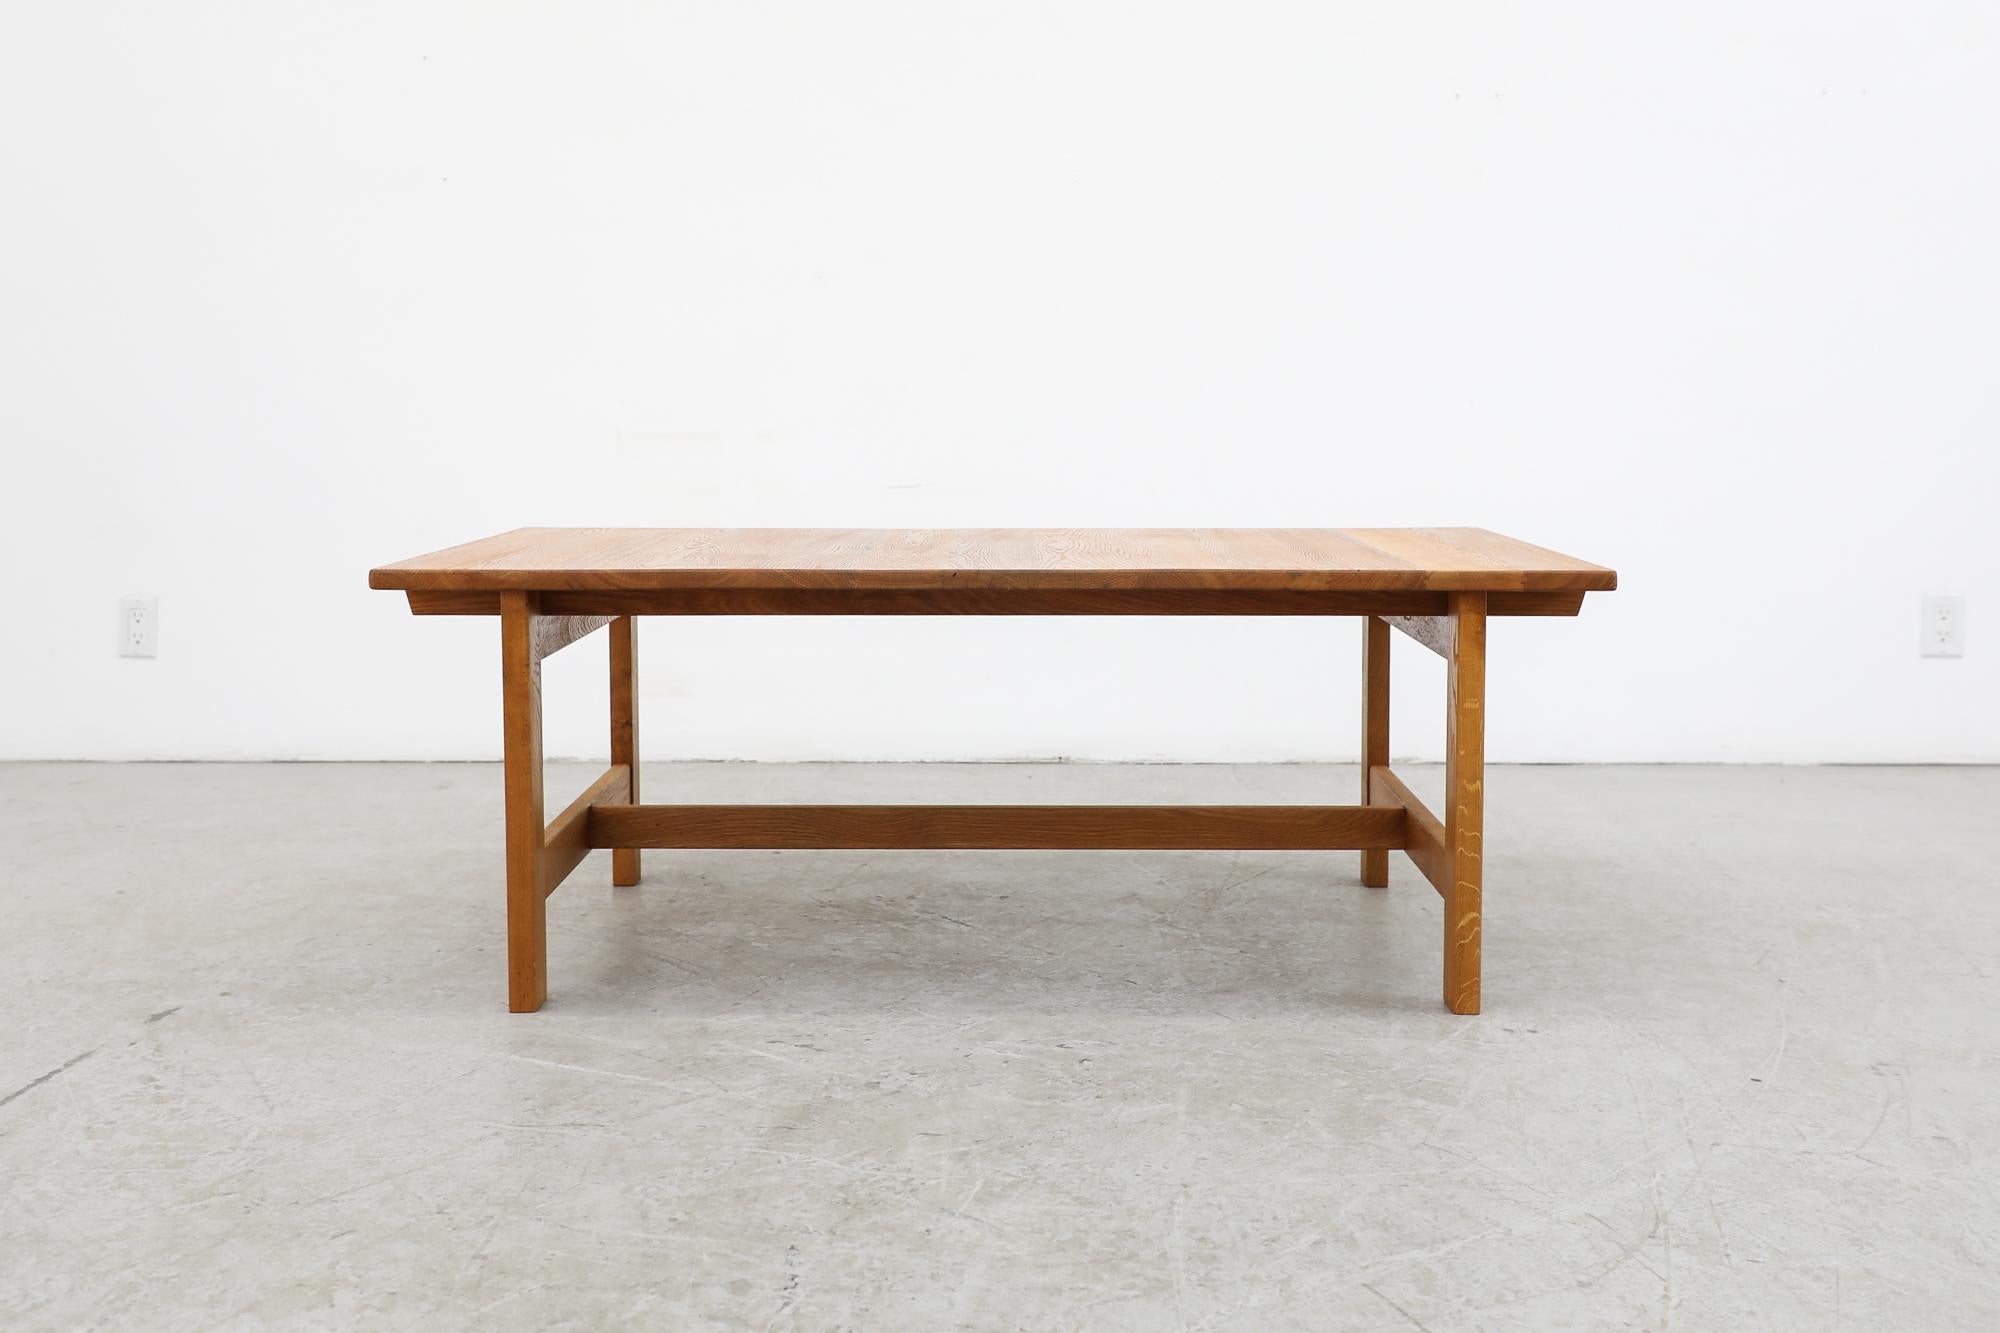 Tall, mid century Kurt Østervig oak coffee table with handsome square frame. In original condition with normal wear for its age. Other Kurt Østervig pieces are available and listed separately.